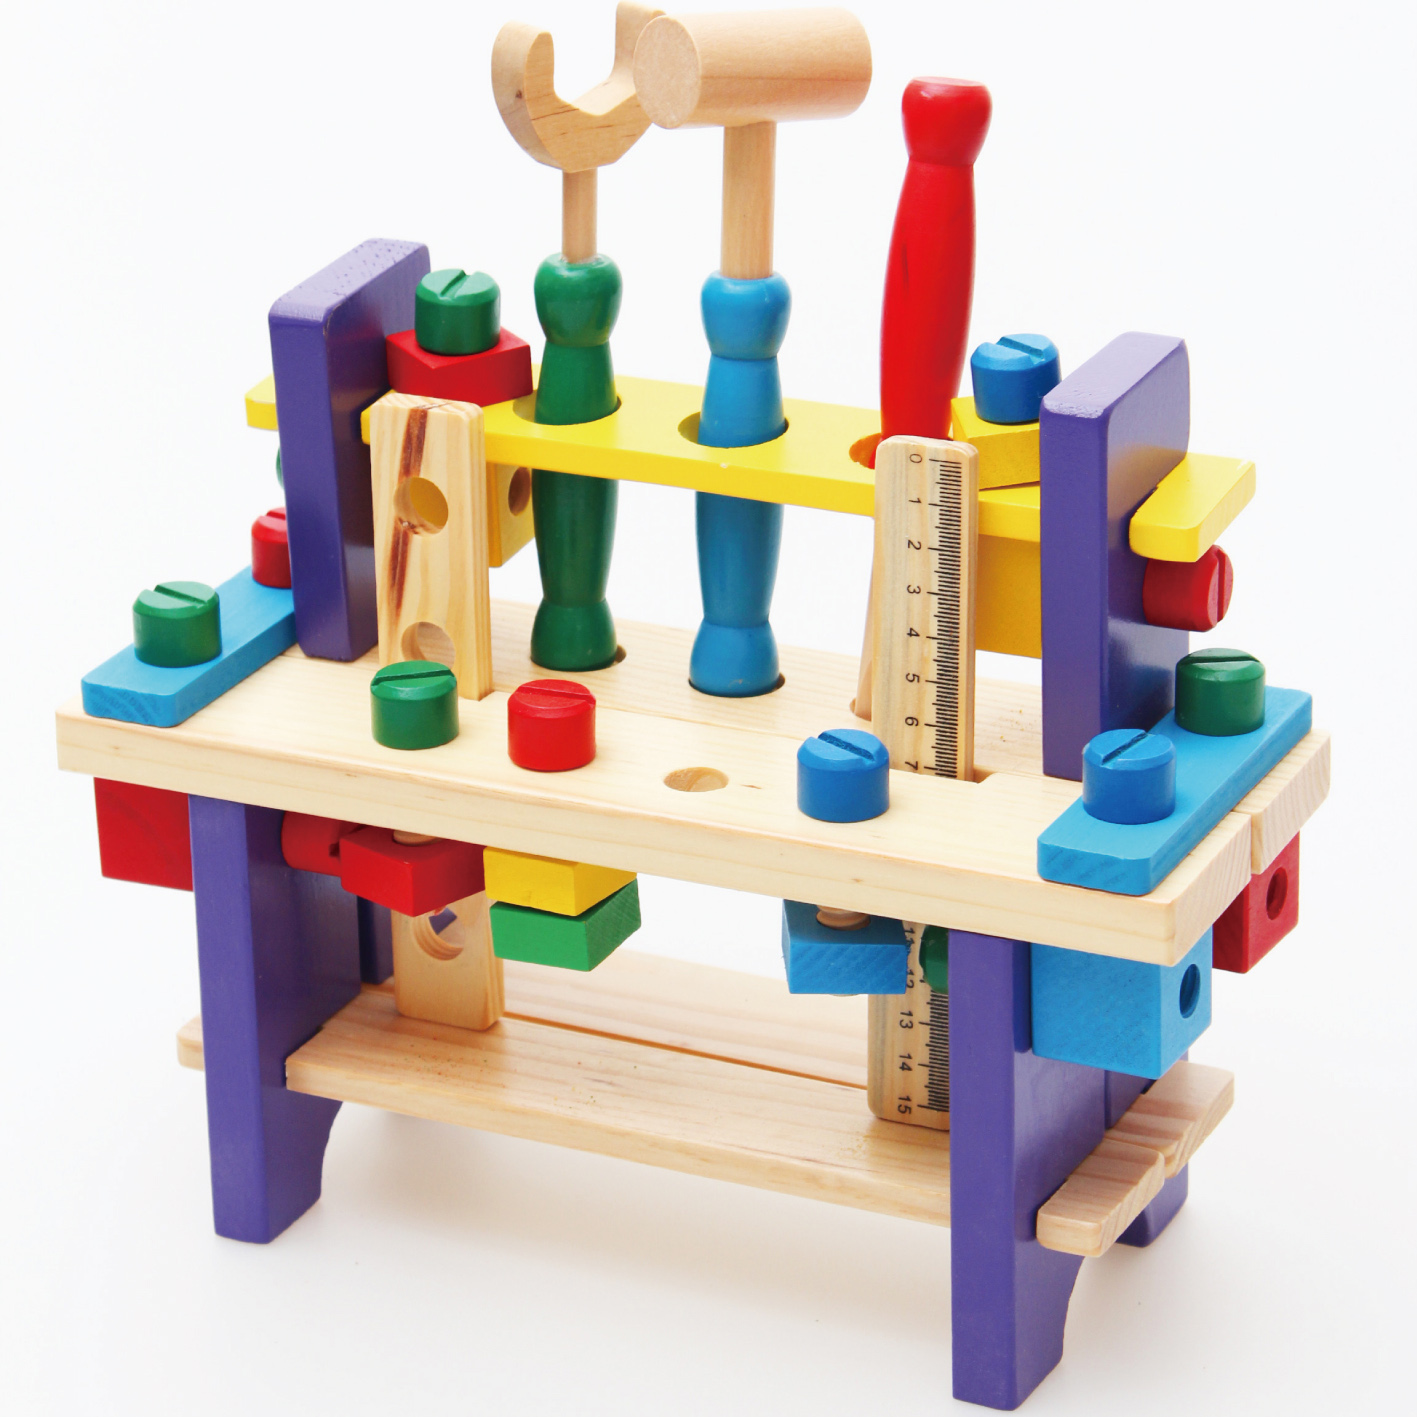 http://i00.i.aliimg.com/wsphoto/v3/1303494582_5/Baby-Toys-Children-Wooden-Toys-Educational-Wooden-Tool-Project-Workbench-Multifunctional-Nut-Combination-Toy-Gift.jpg